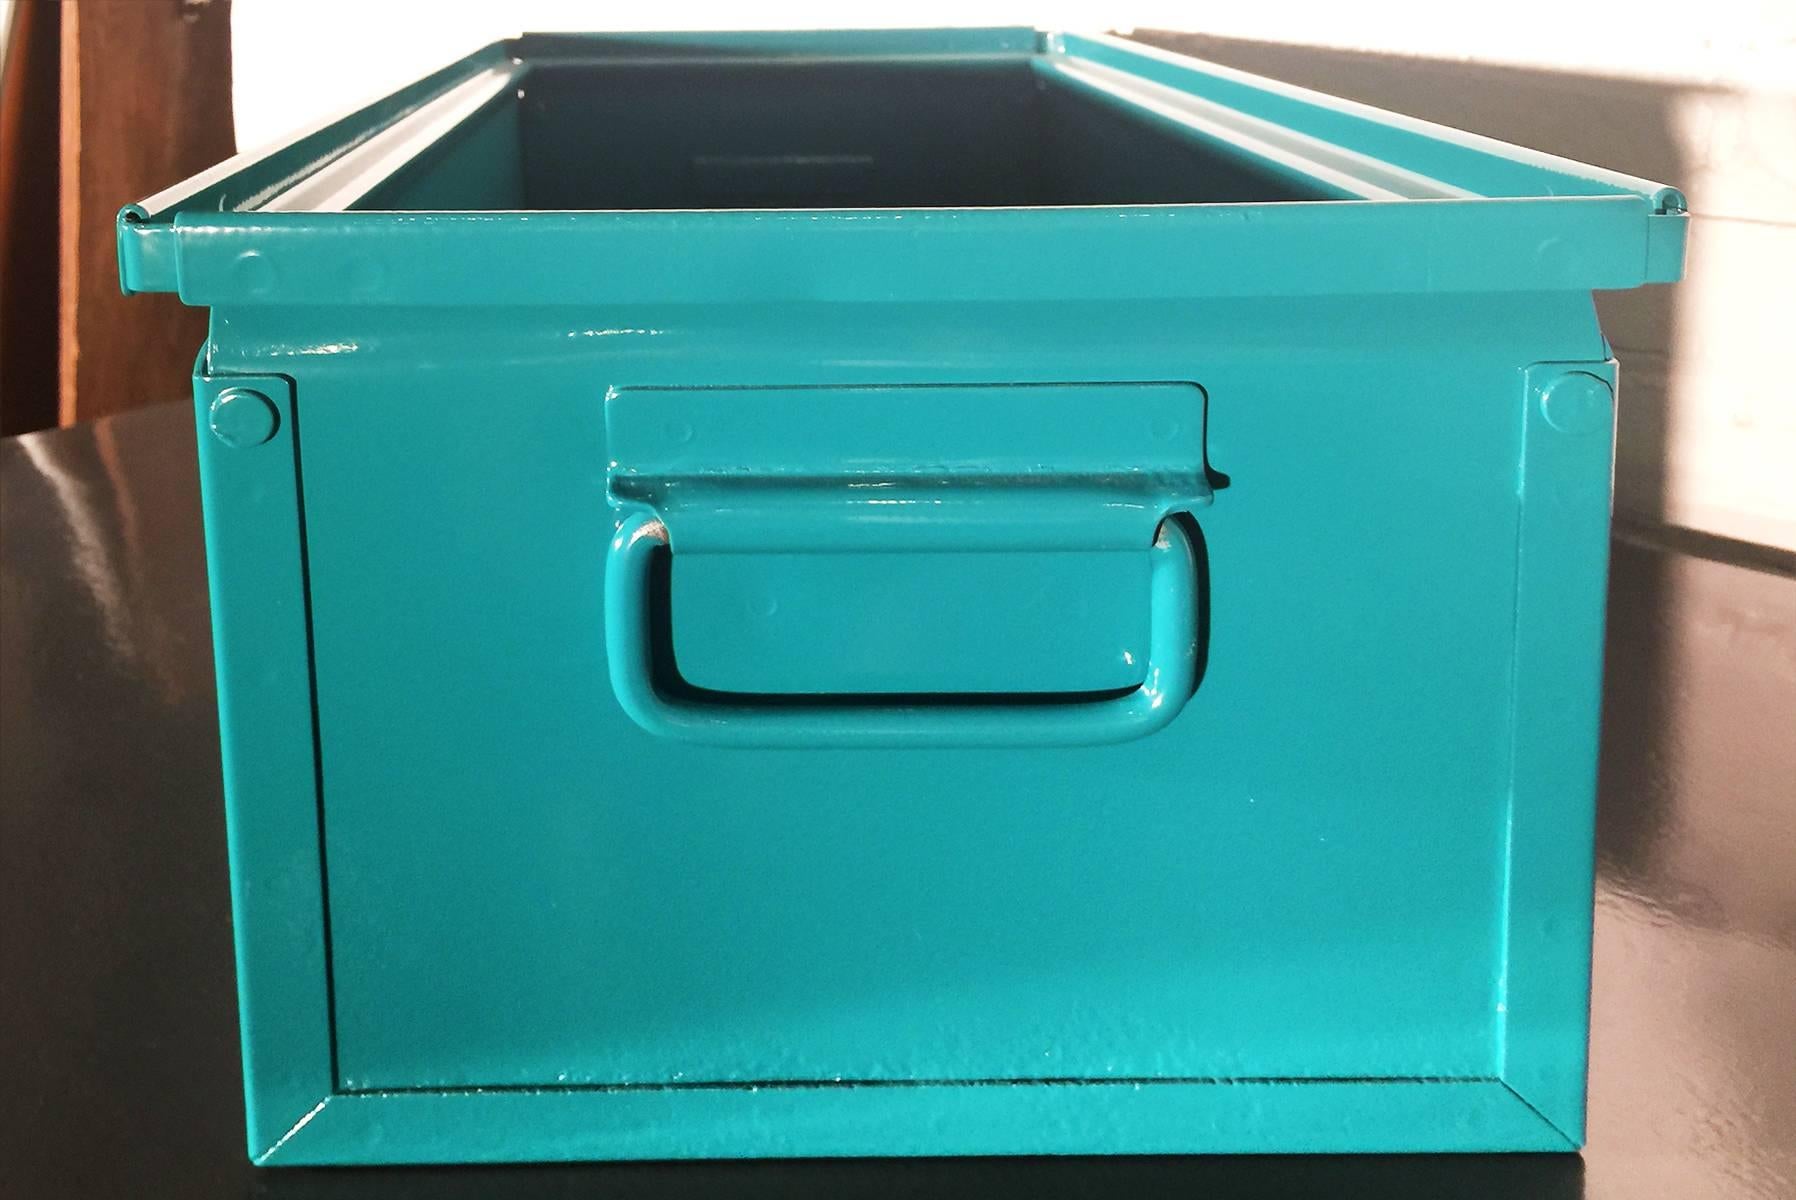 We refinished our fantastic 1940s Industrial storage bin in a gloss teal powder coat. This classic, heavy-duty steel organizer is sure to keep your office in tip-top shape.